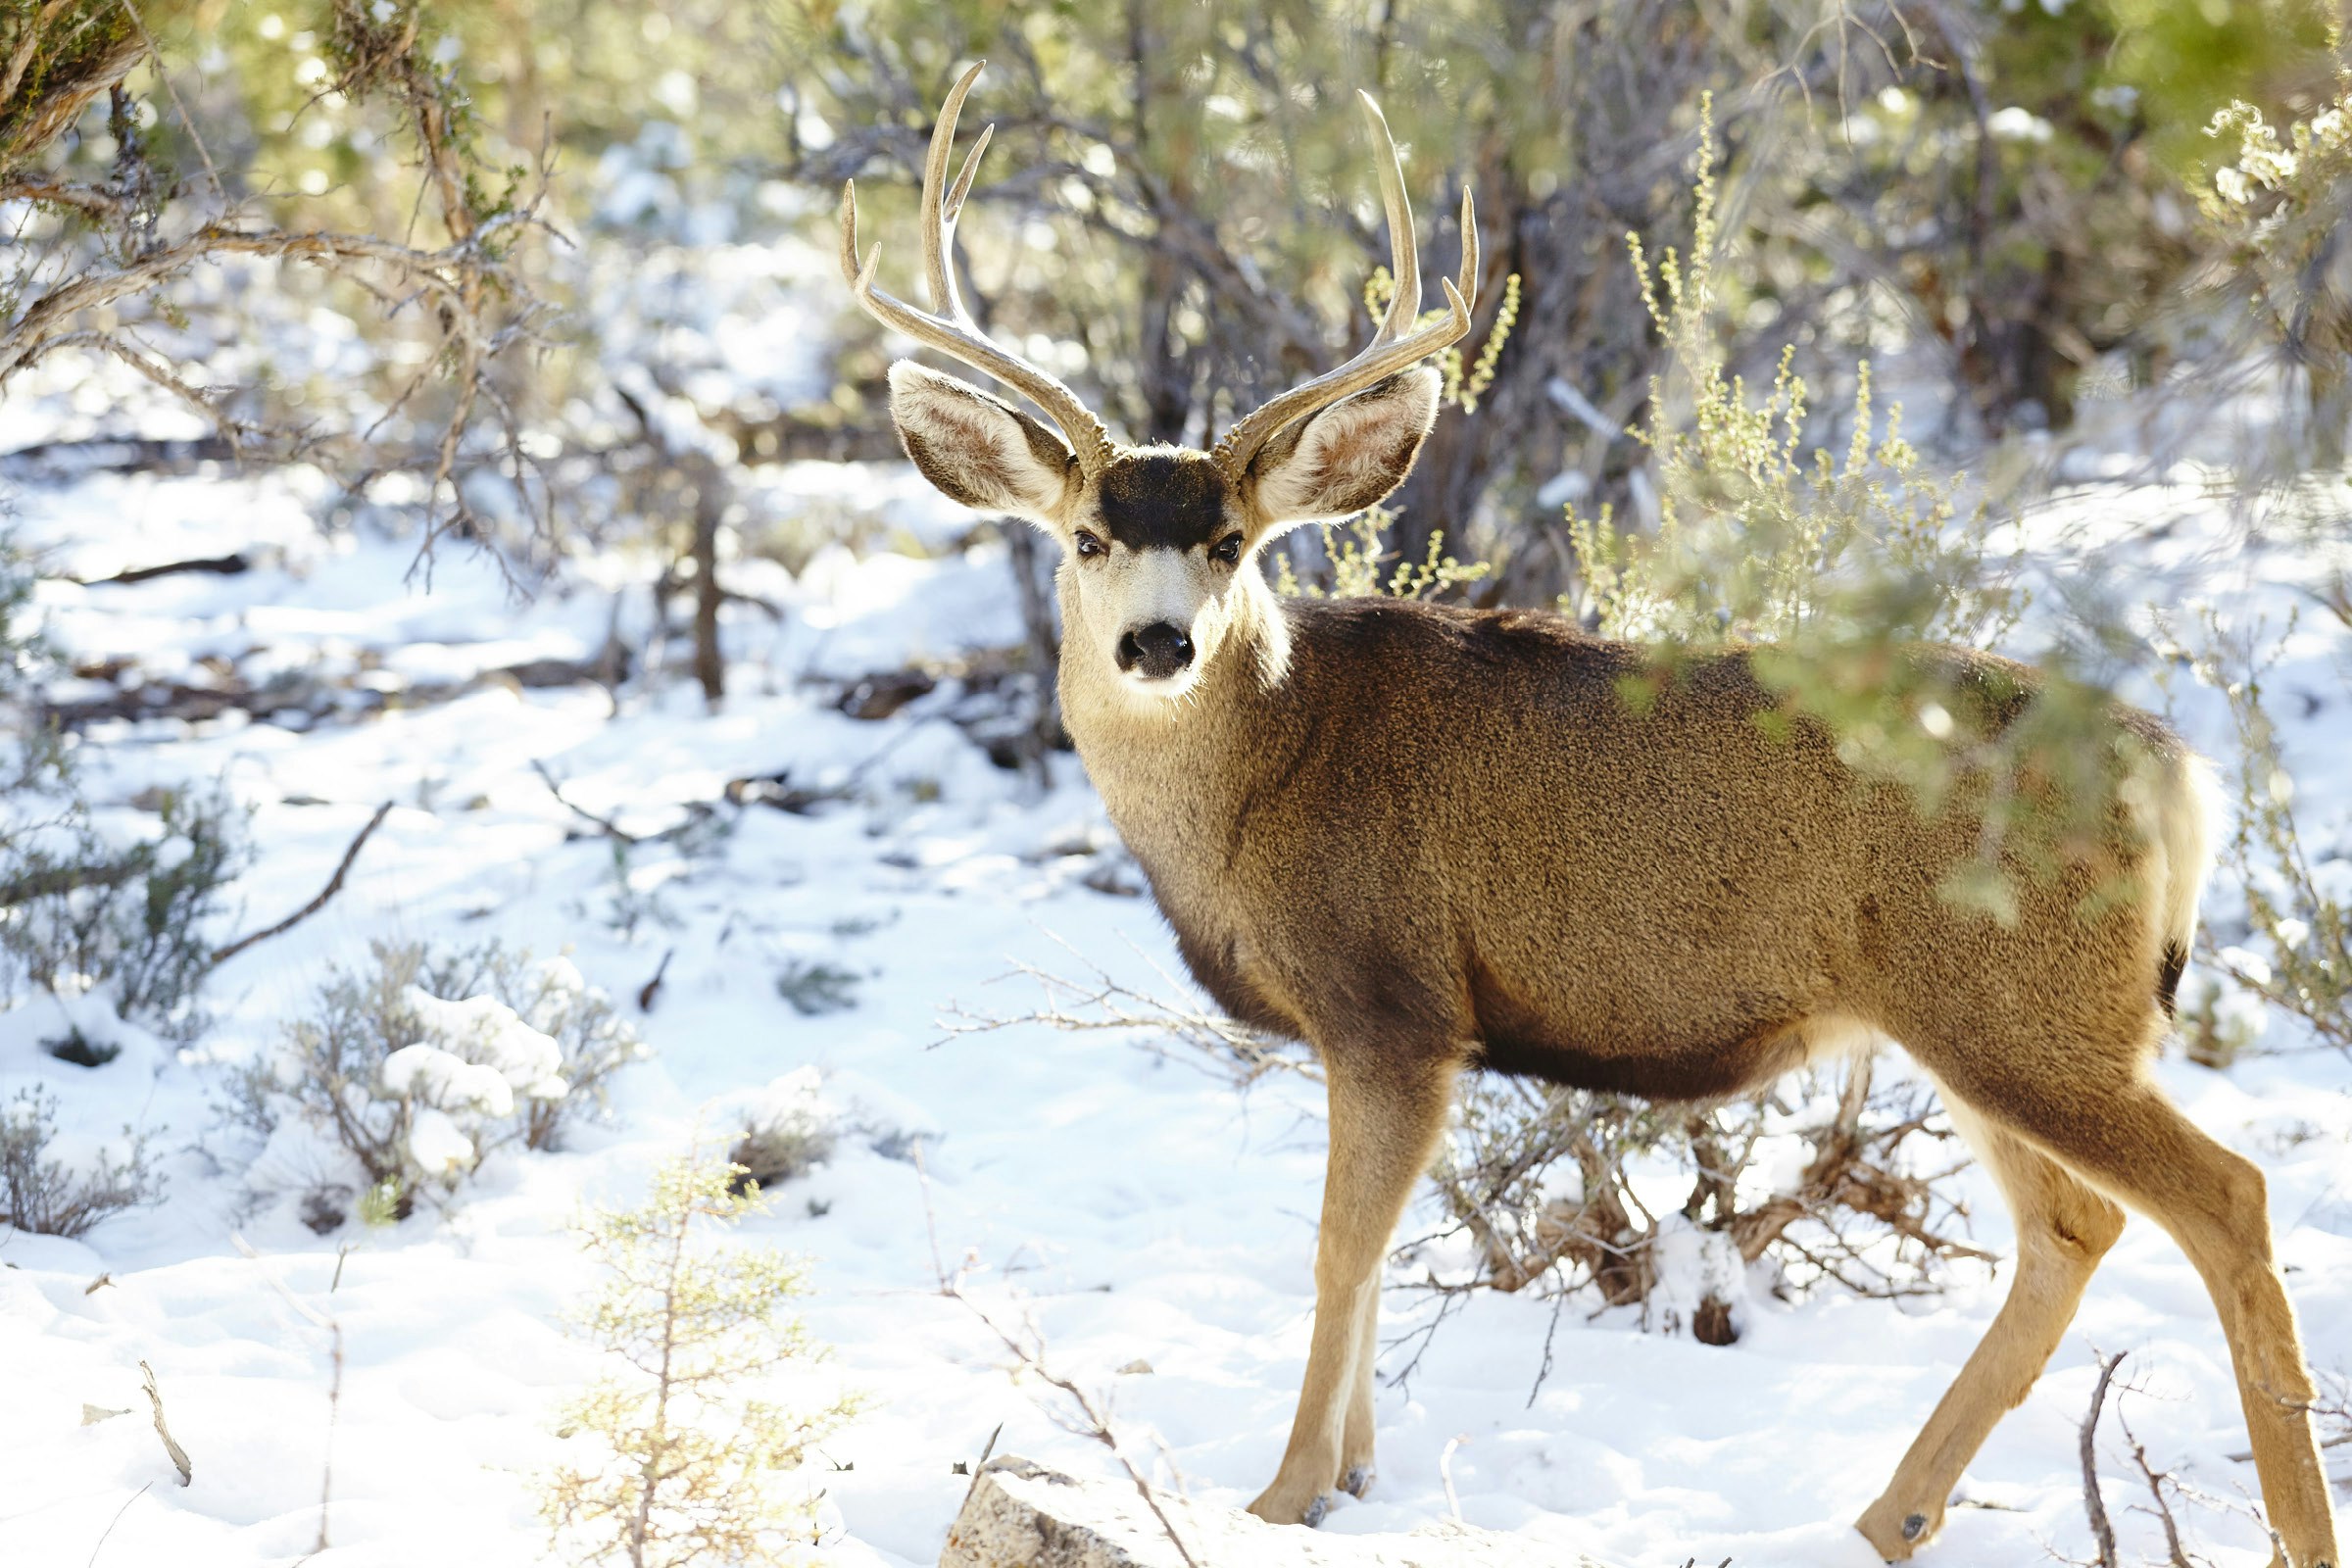 A mule deer stops to face the camera on a walk through the snow